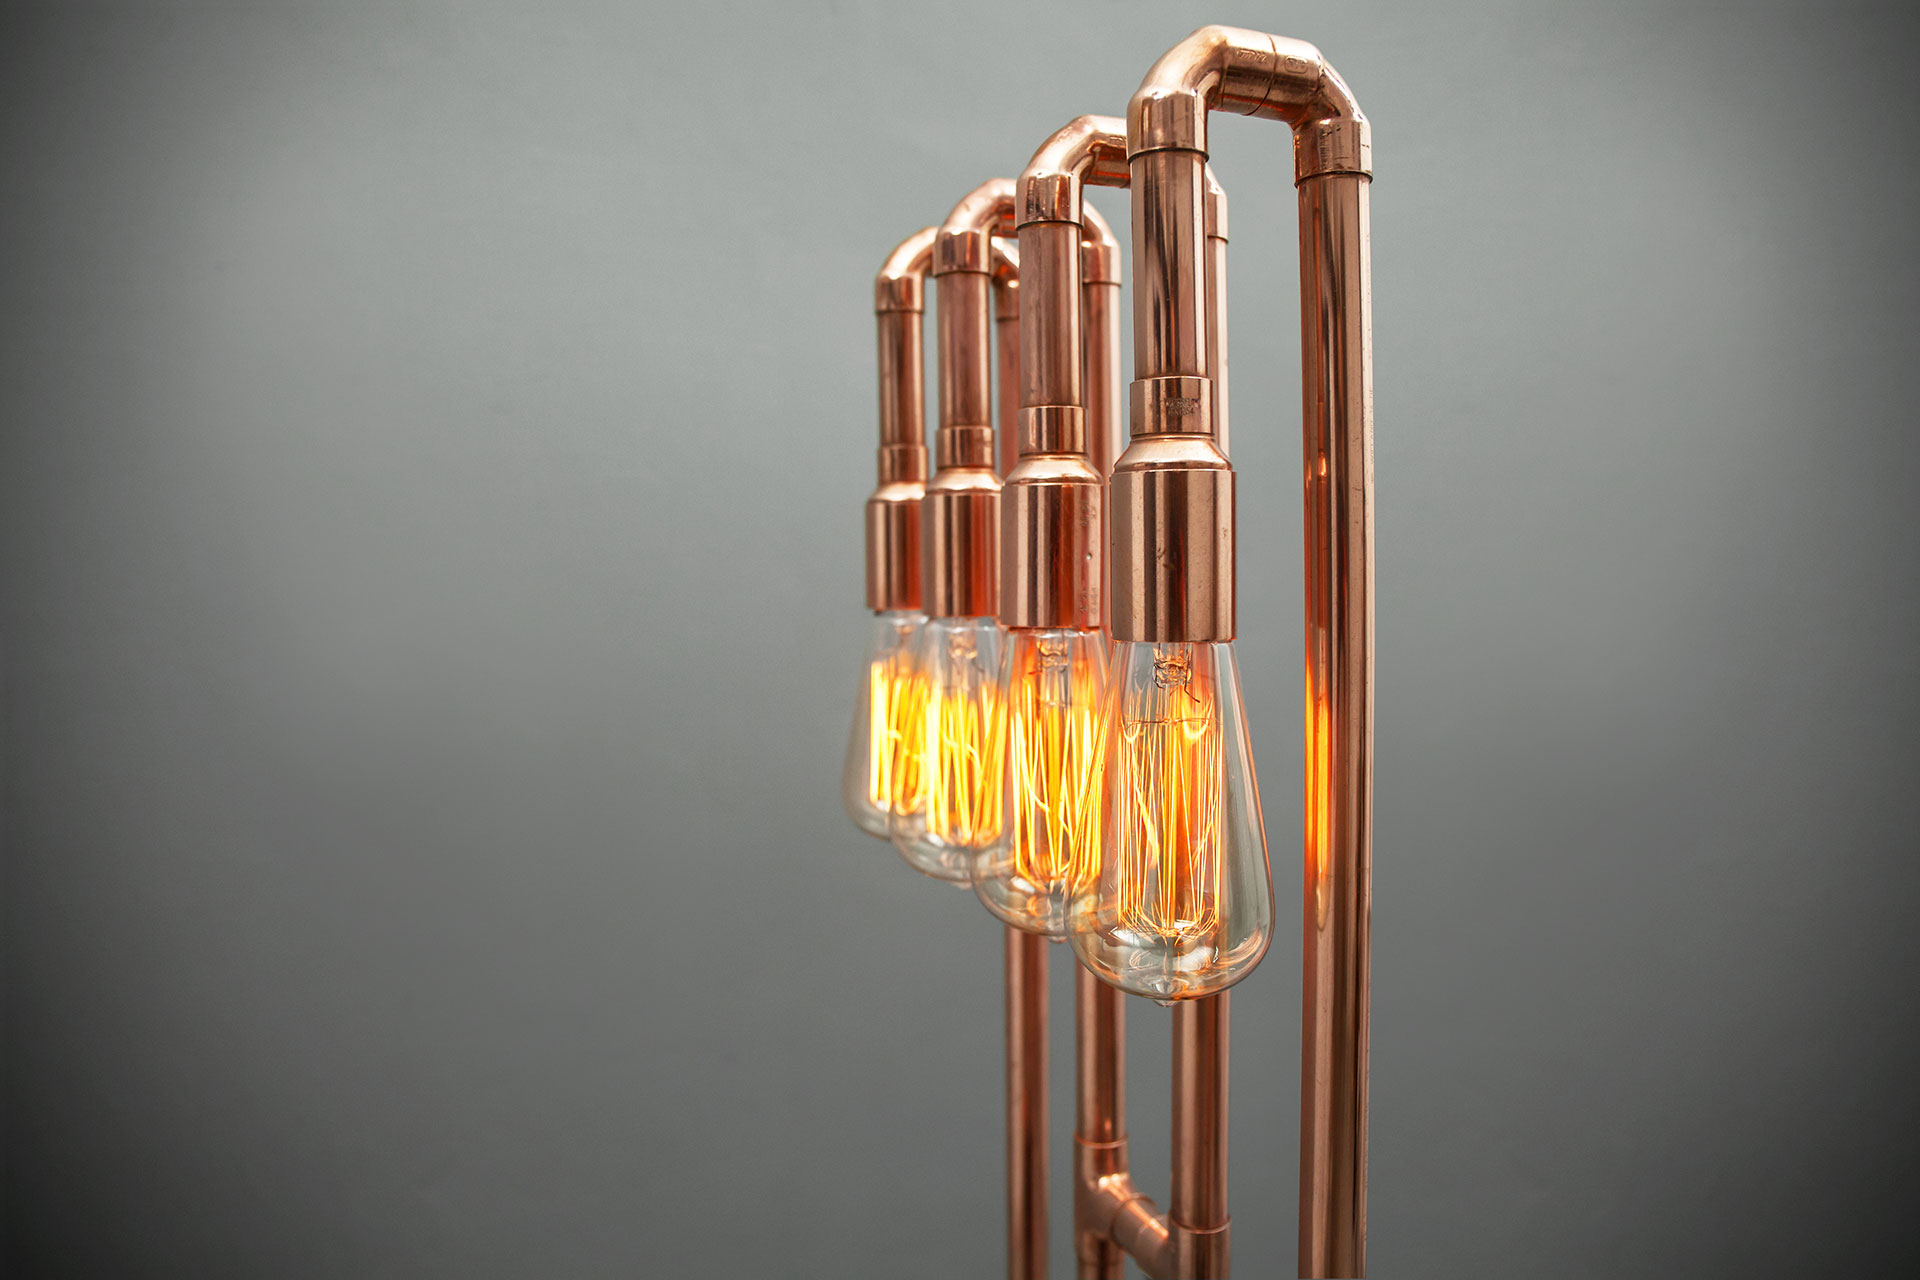 Vintage Edison bulbs in copper floor lamp inspired by loft style